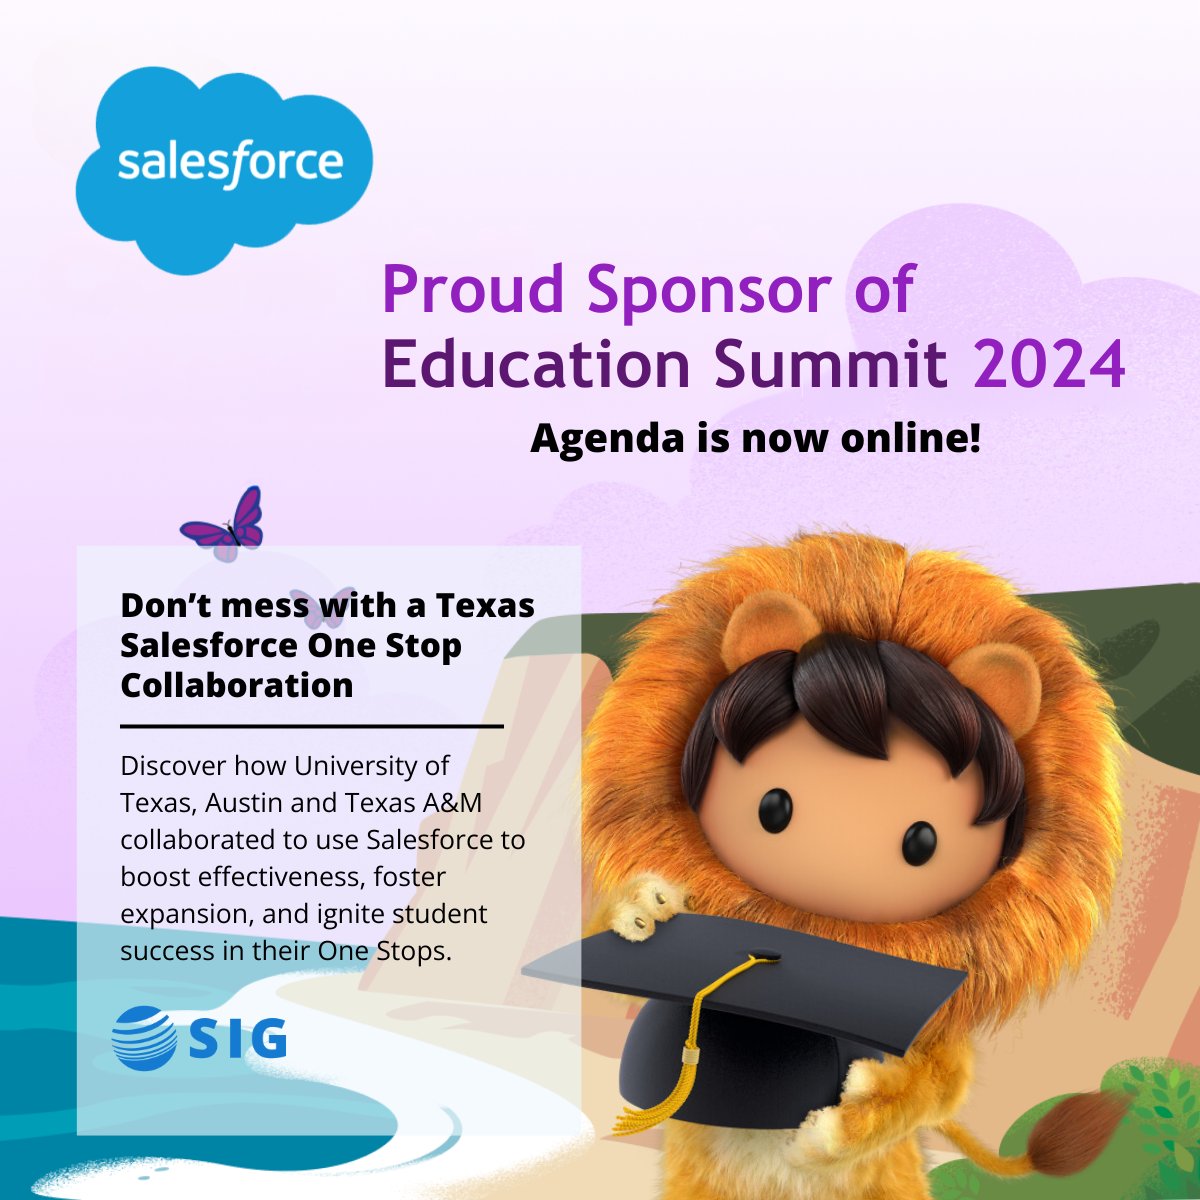 We are thrilled to be presenting at #Salesforce #EdSummit this year! Join our session to discover how we worked with two #universities for a successful collaboration using Salesforce in their One Stops.  
Learn more 👉 ow.ly/FYvT50QRP0O
#salesforcepartner